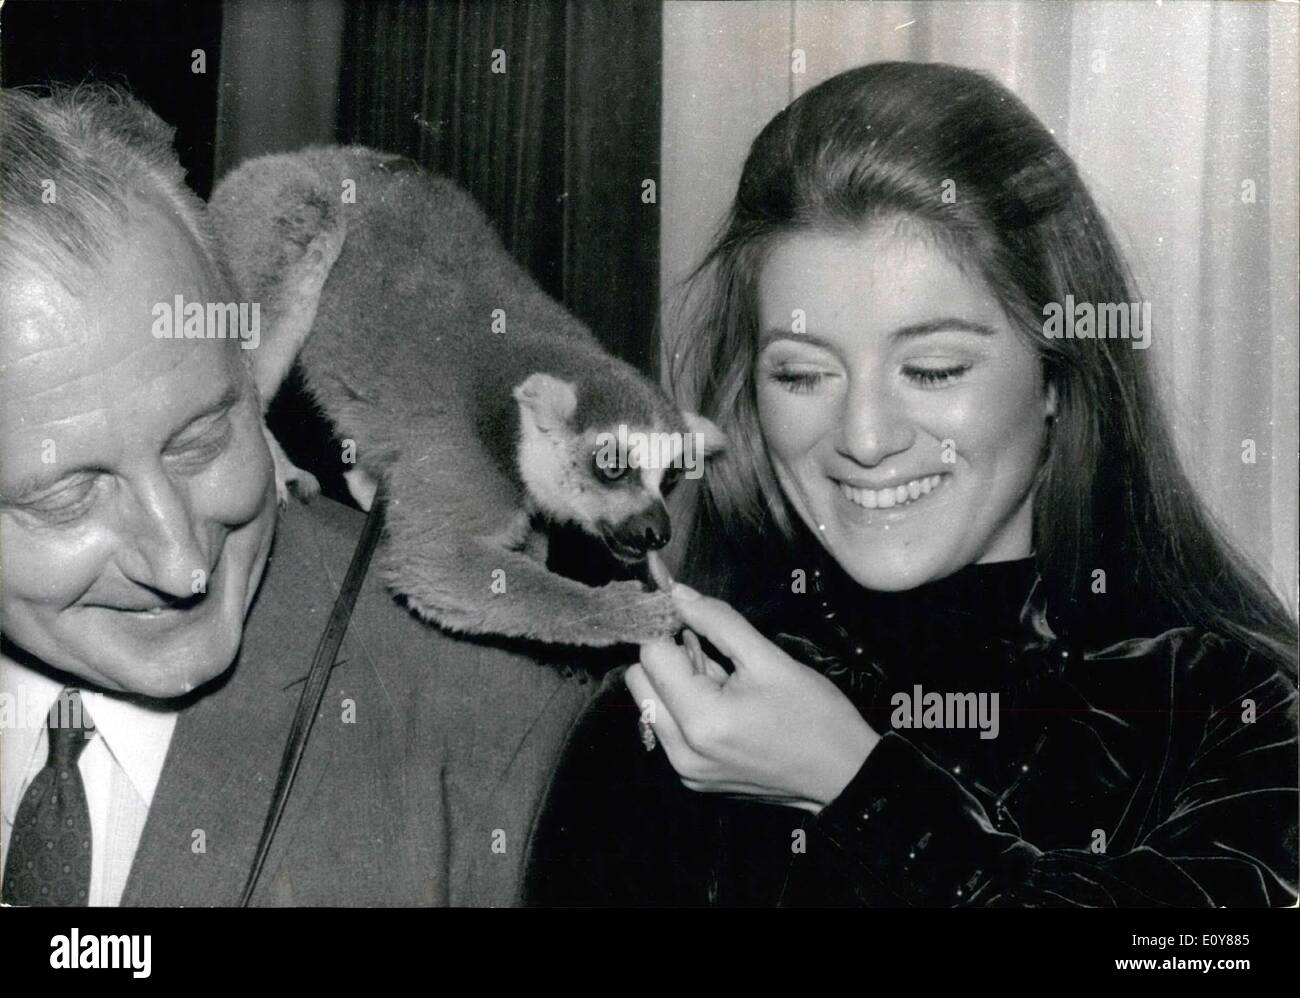 Jan. 19, 1969 - They are the sponsors of the Animal's Protective Society Rescue Operation. The campaign is meant to gather the necessary funds to build a new animal refuge in Gennevilliers. Lafay is the Industrial & Scientific Development Secretary of State for France. Stock Photo